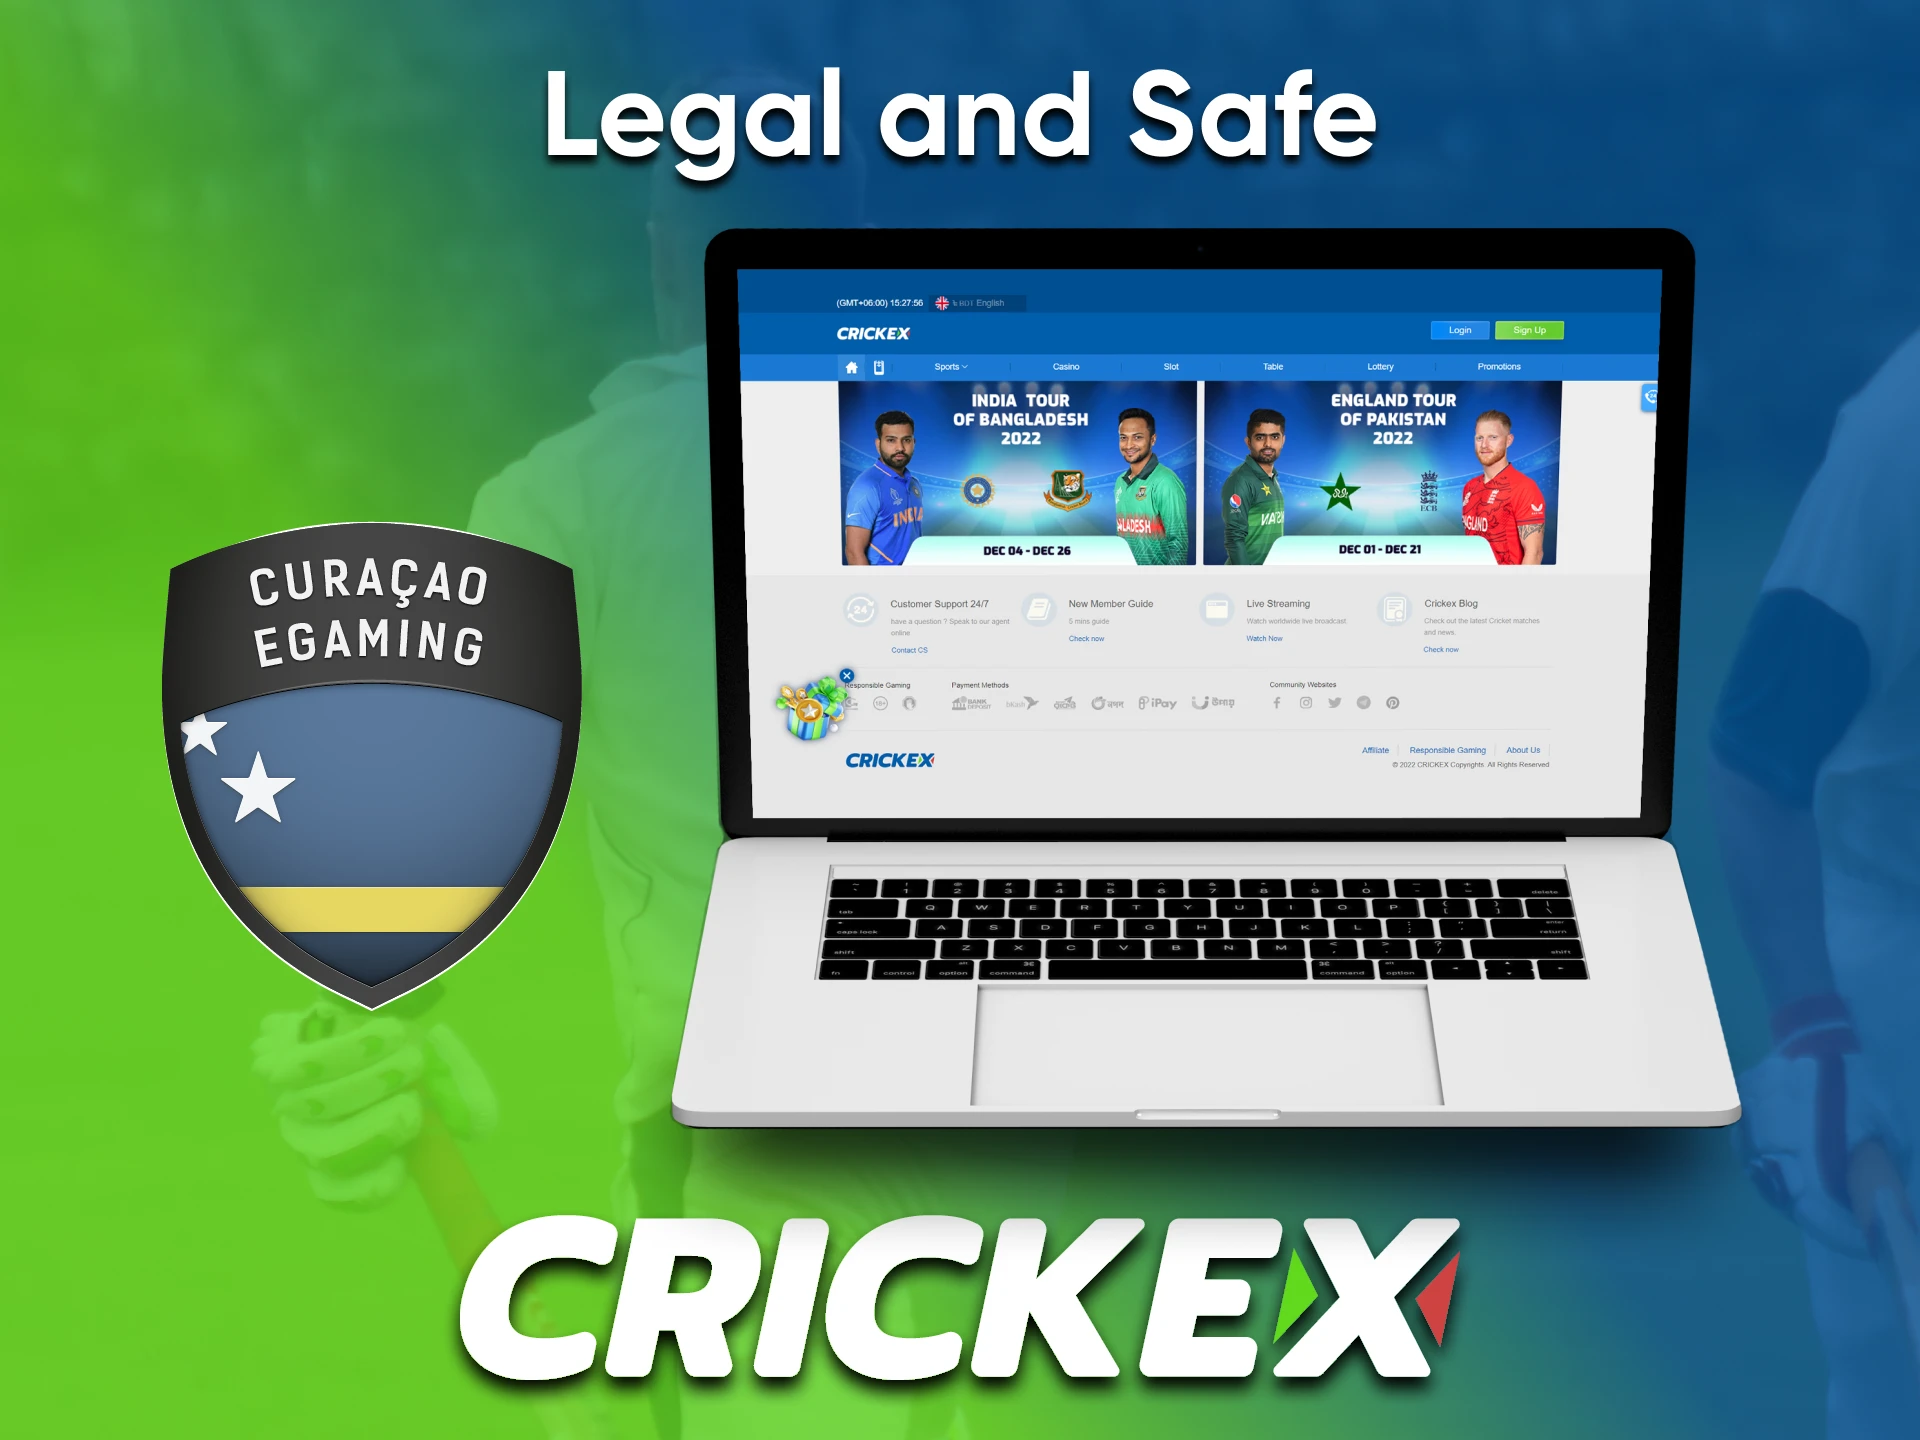 Using the Crickex service is absolutely safe for users.